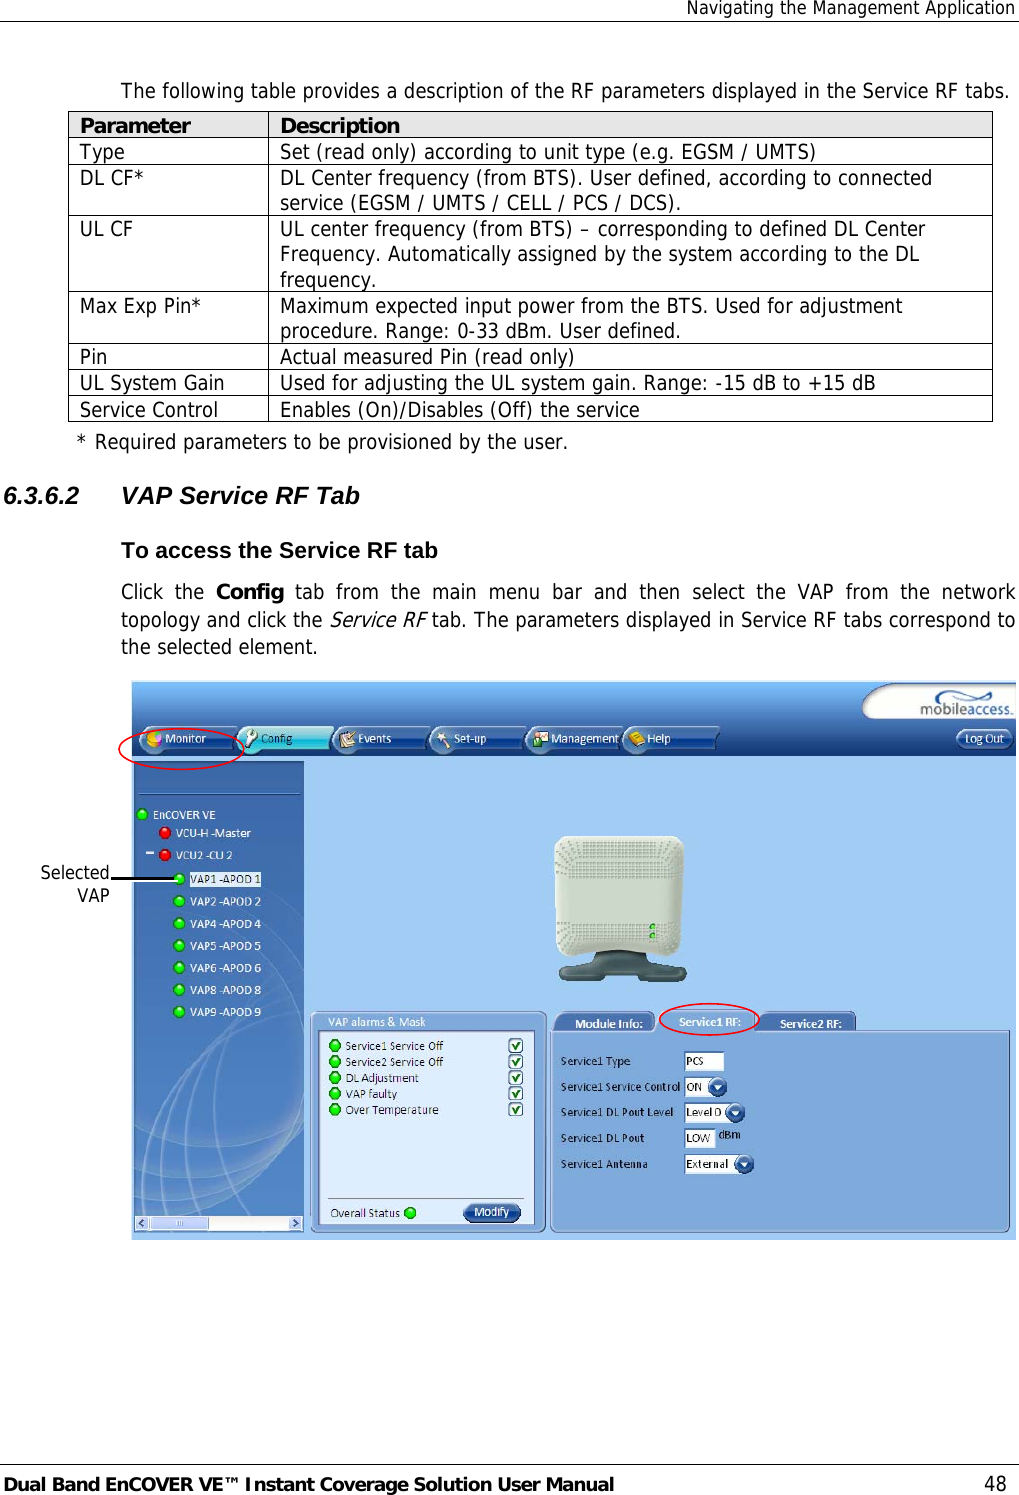 Navigating the Management Application Dual Band EnCOVER VE™ Instant Coverage Solution User Manual  48 The following table provides a description of the RF parameters displayed in the Service RF tabs. Parameter  Description Type  Set (read only) according to unit type (e.g. EGSM / UMTS) DL CF*  DL Center frequency (from BTS). User defined, according to connected service (EGSM / UMTS / CELL / PCS / DCS). UL CF  UL center frequency (from BTS) – corresponding to defined DL Center Frequency. Automatically assigned by the system according to the DL frequency. Max Exp Pin*  Maximum expected input power from the BTS. Used for adjustment procedure. Range: 0-33 dBm. User defined. Pin  Actual measured Pin (read only) UL System Gain  Used for adjusting the UL system gain. Range: -15 dB to +15 dB Service Control  Enables (On)/Disables (Off) the service * Required parameters to be provisioned by the user. 6.3.6.2  VAP Service RF Tab To access the Service RF tab Click the Config tab from the main menu bar and then select the VAP from the network topology and click the Service RF tab. The parameters displayed in Service RF tabs correspond to the selected element.  SelectedVAP